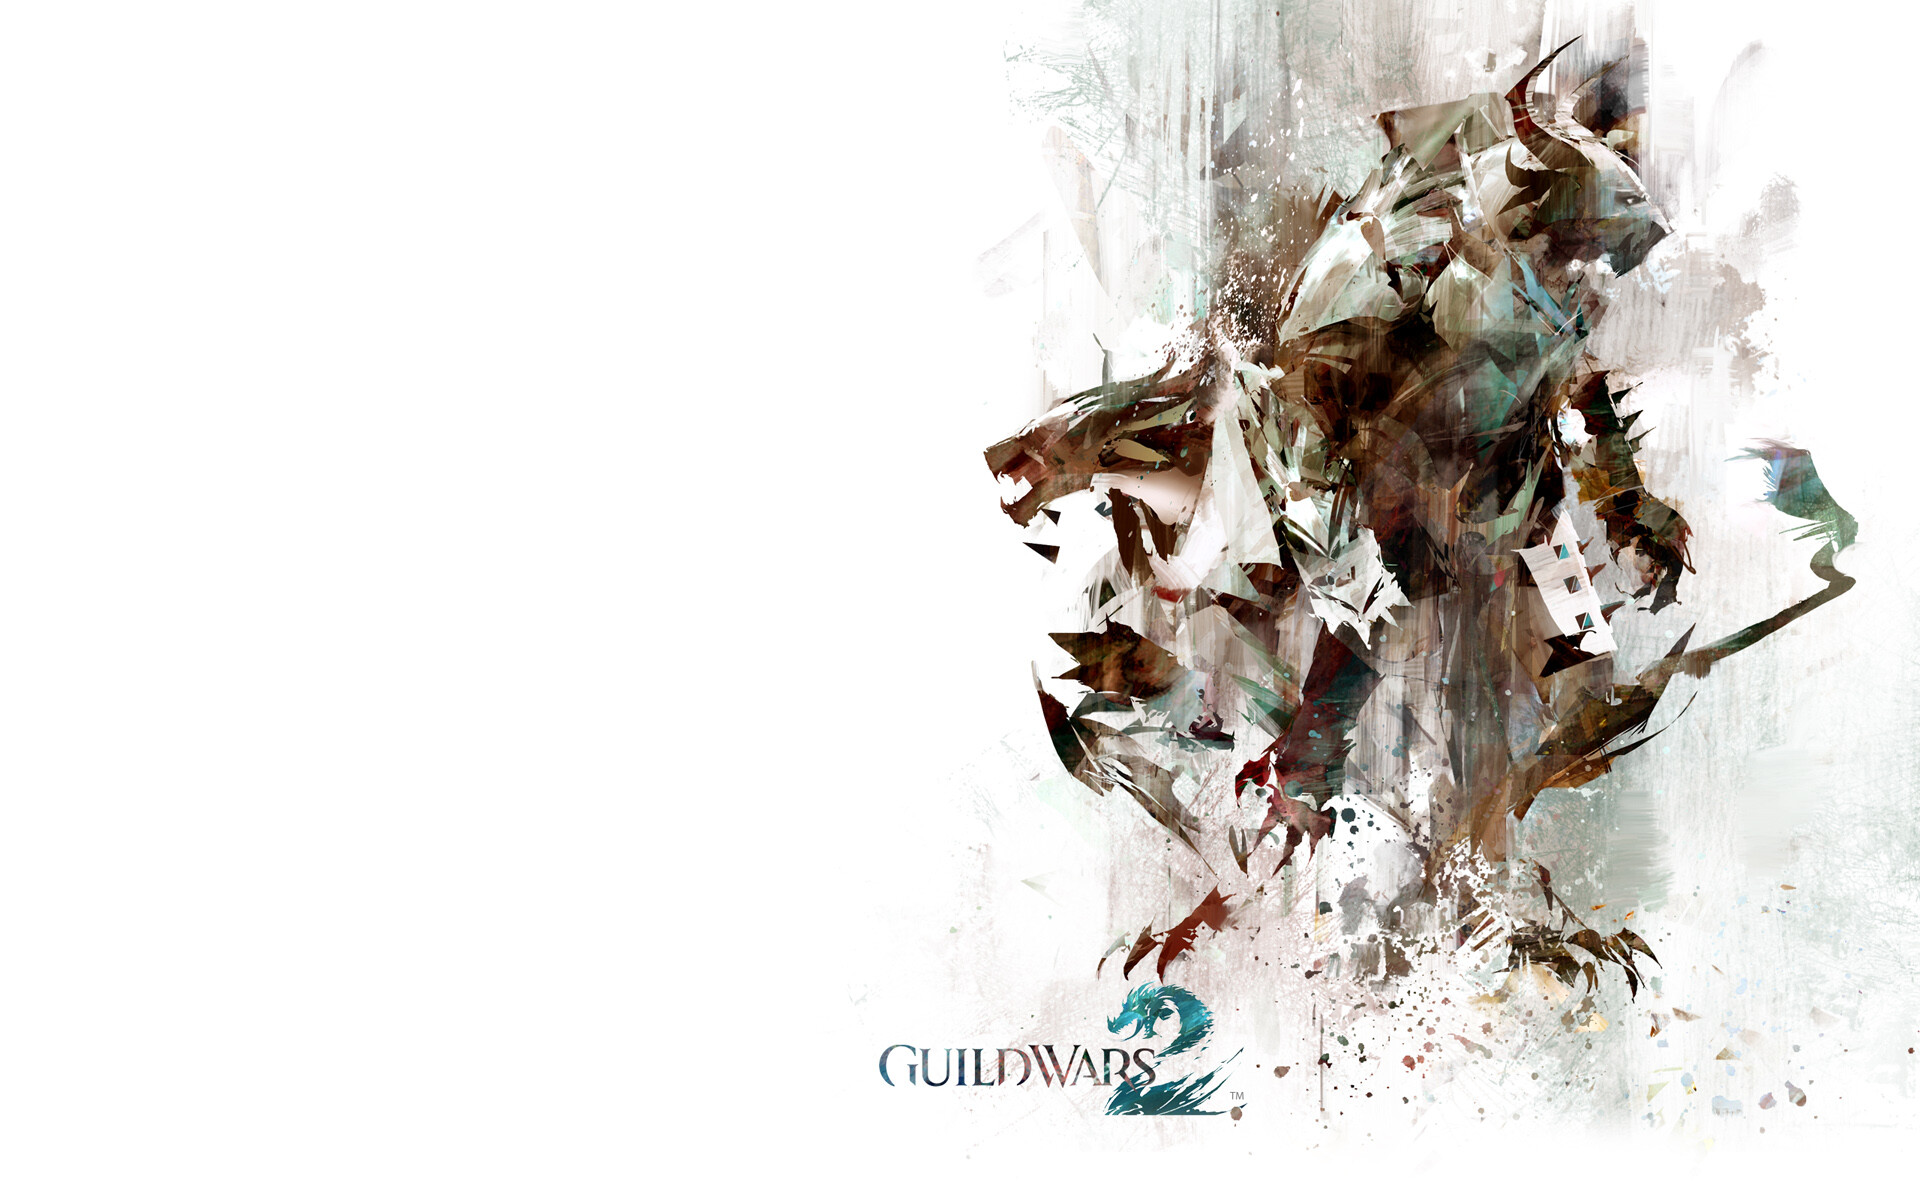 Guild Wars: Won many editor's choice awards, such as Best Value, Best Massively Multiplayer Online Role-Playing Game (MMORPG). 1920x1200 HD Background.